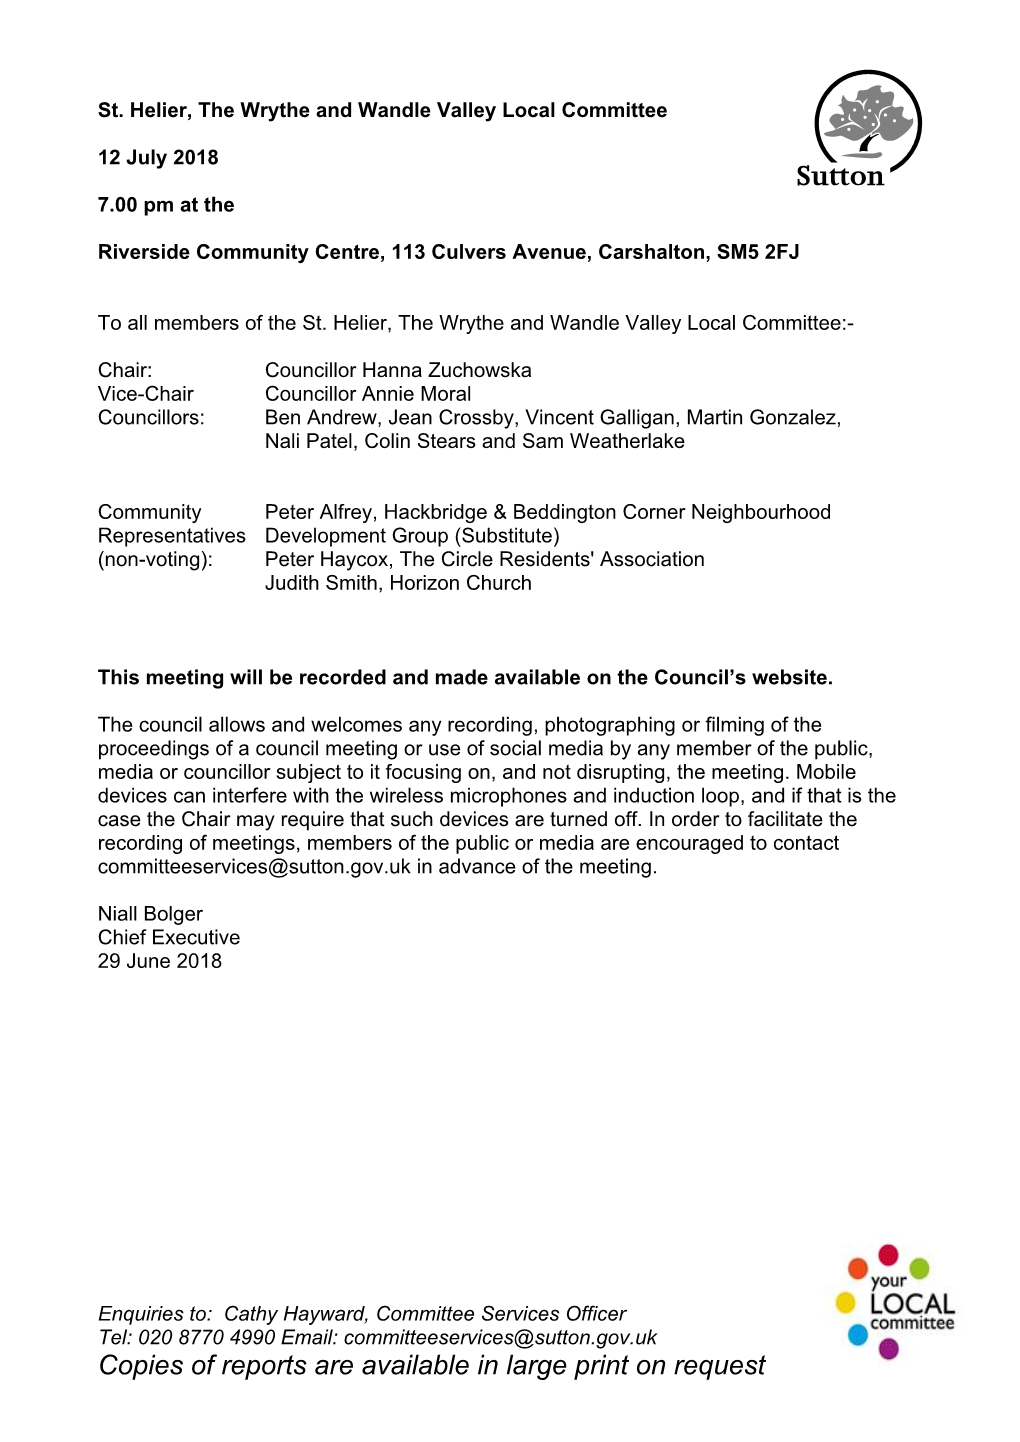 (Public Pack)Agenda Document for St. Helier, the Wrythe and Wandle Valley Local Committee, 12/07/2018 19:00